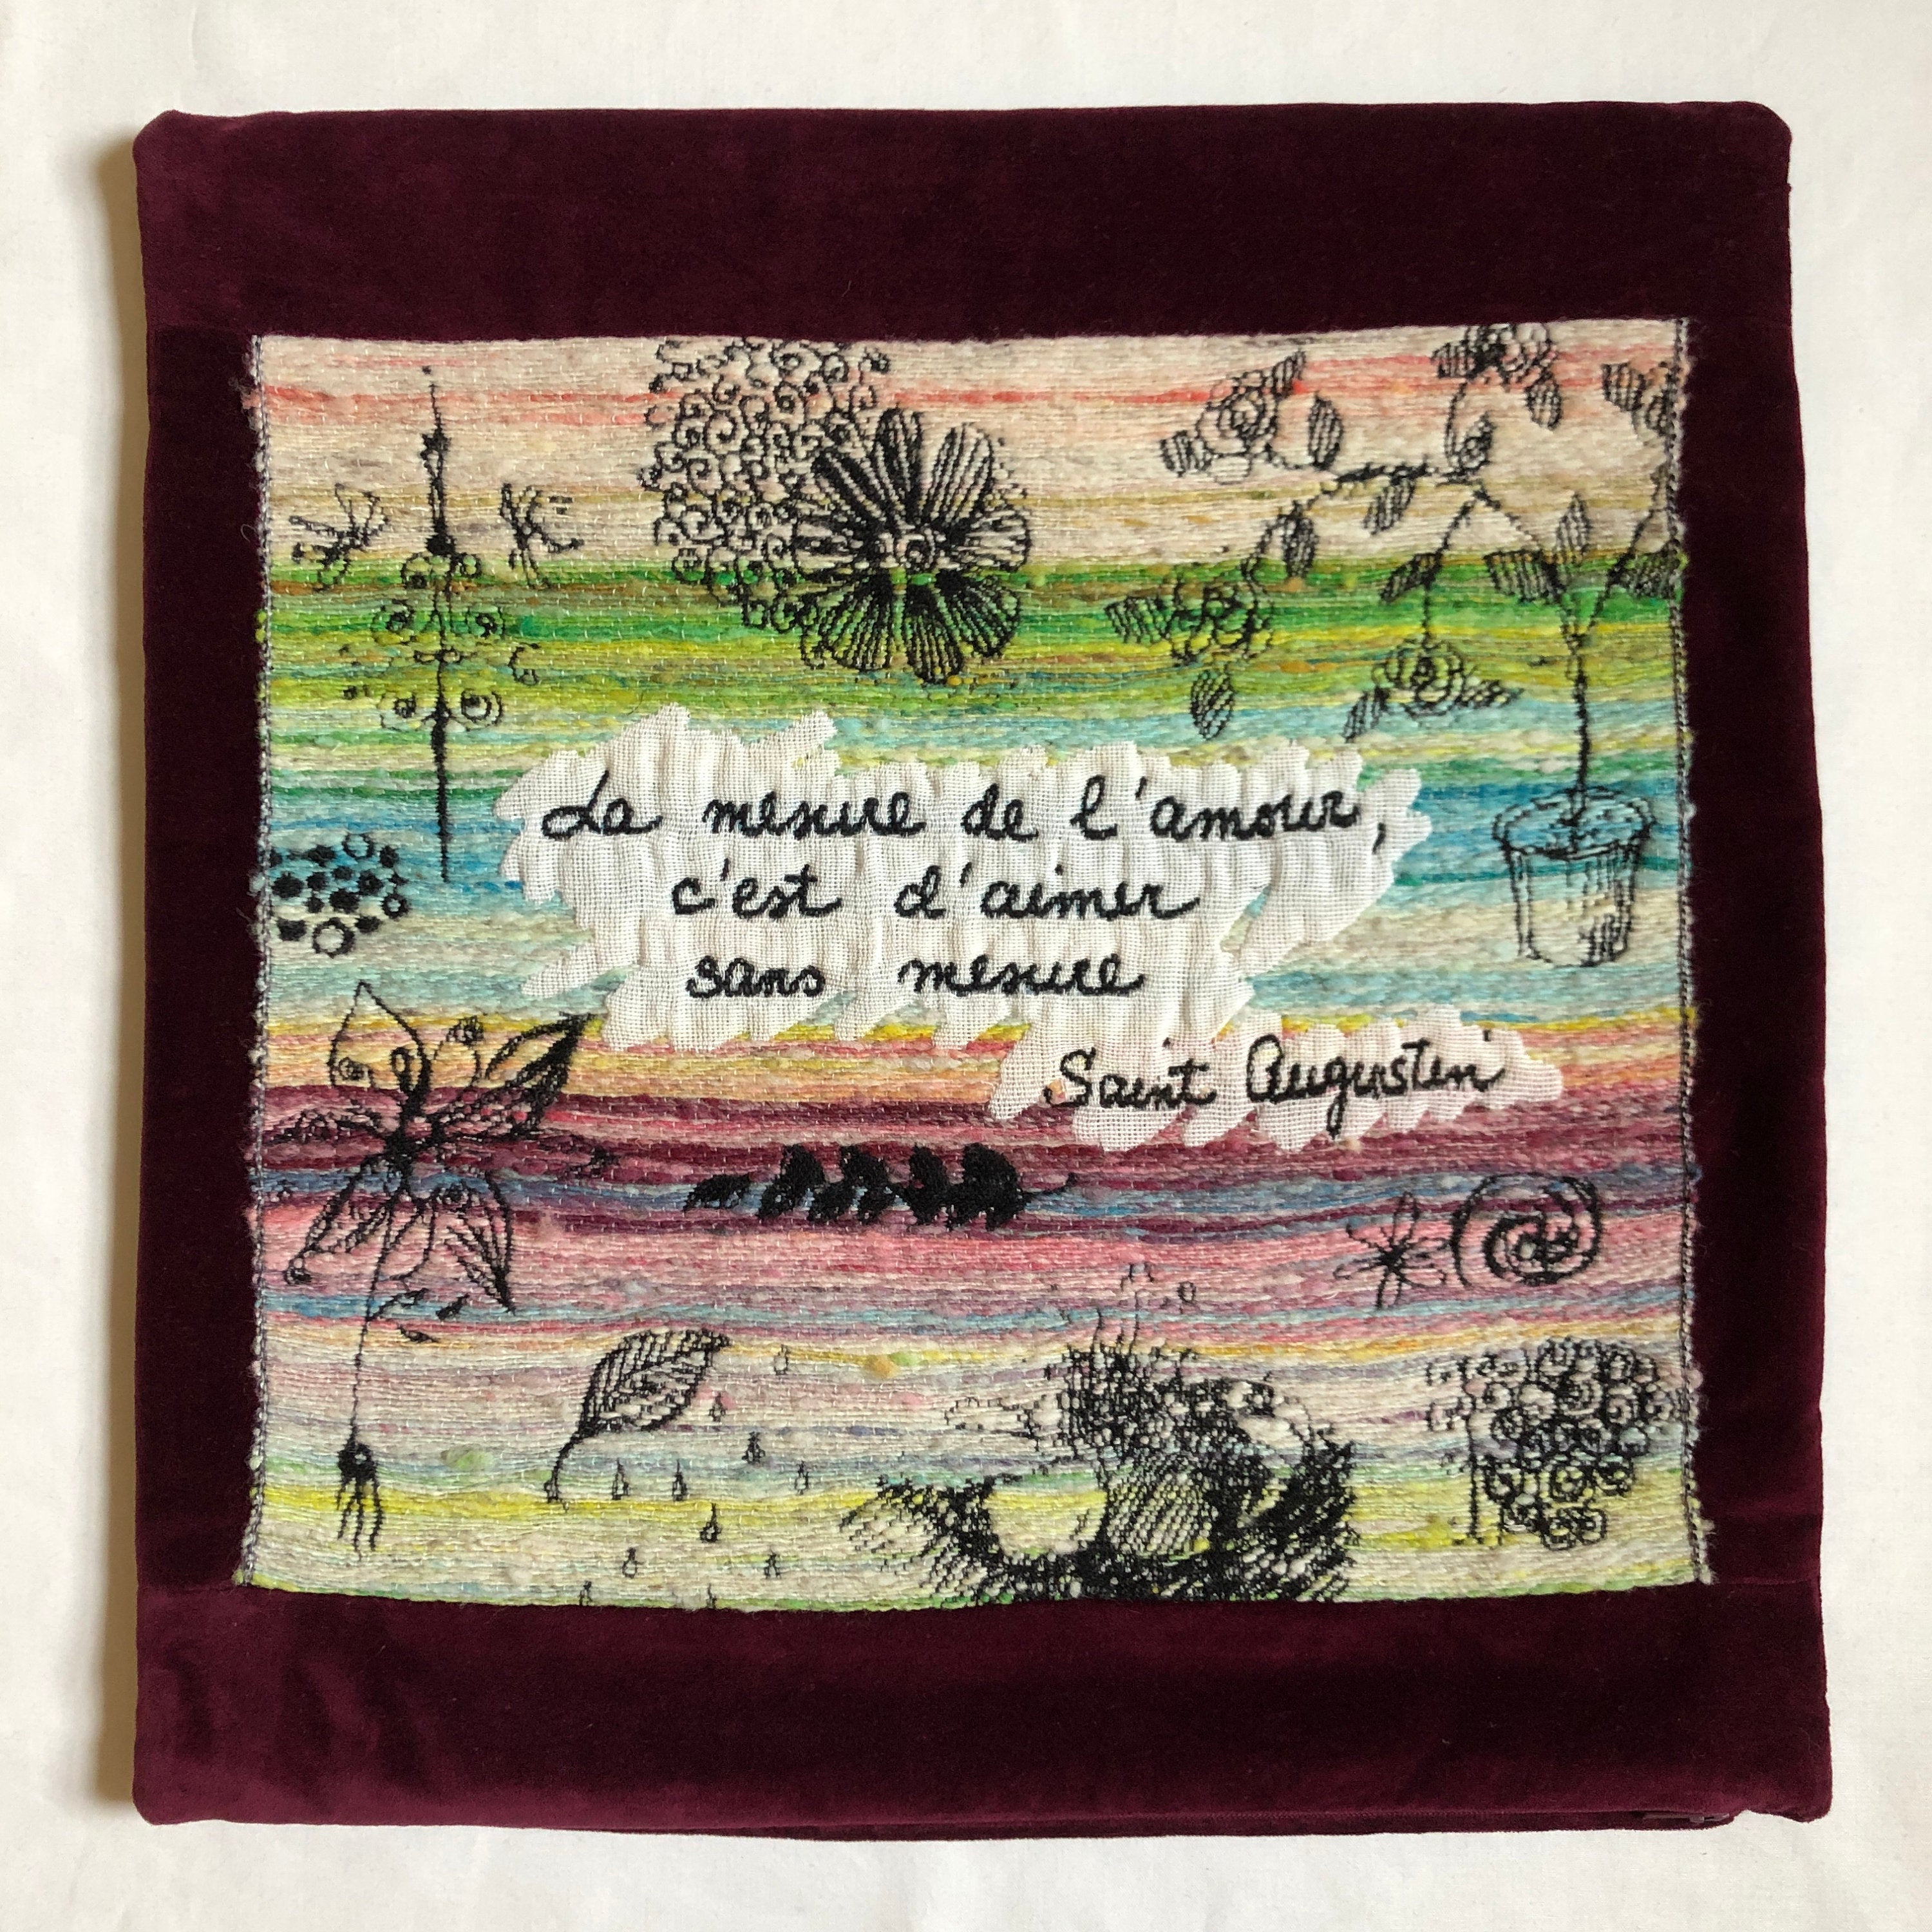 Measure of Love -  Pillow Cover with Handwoven Jacquard Tapestry